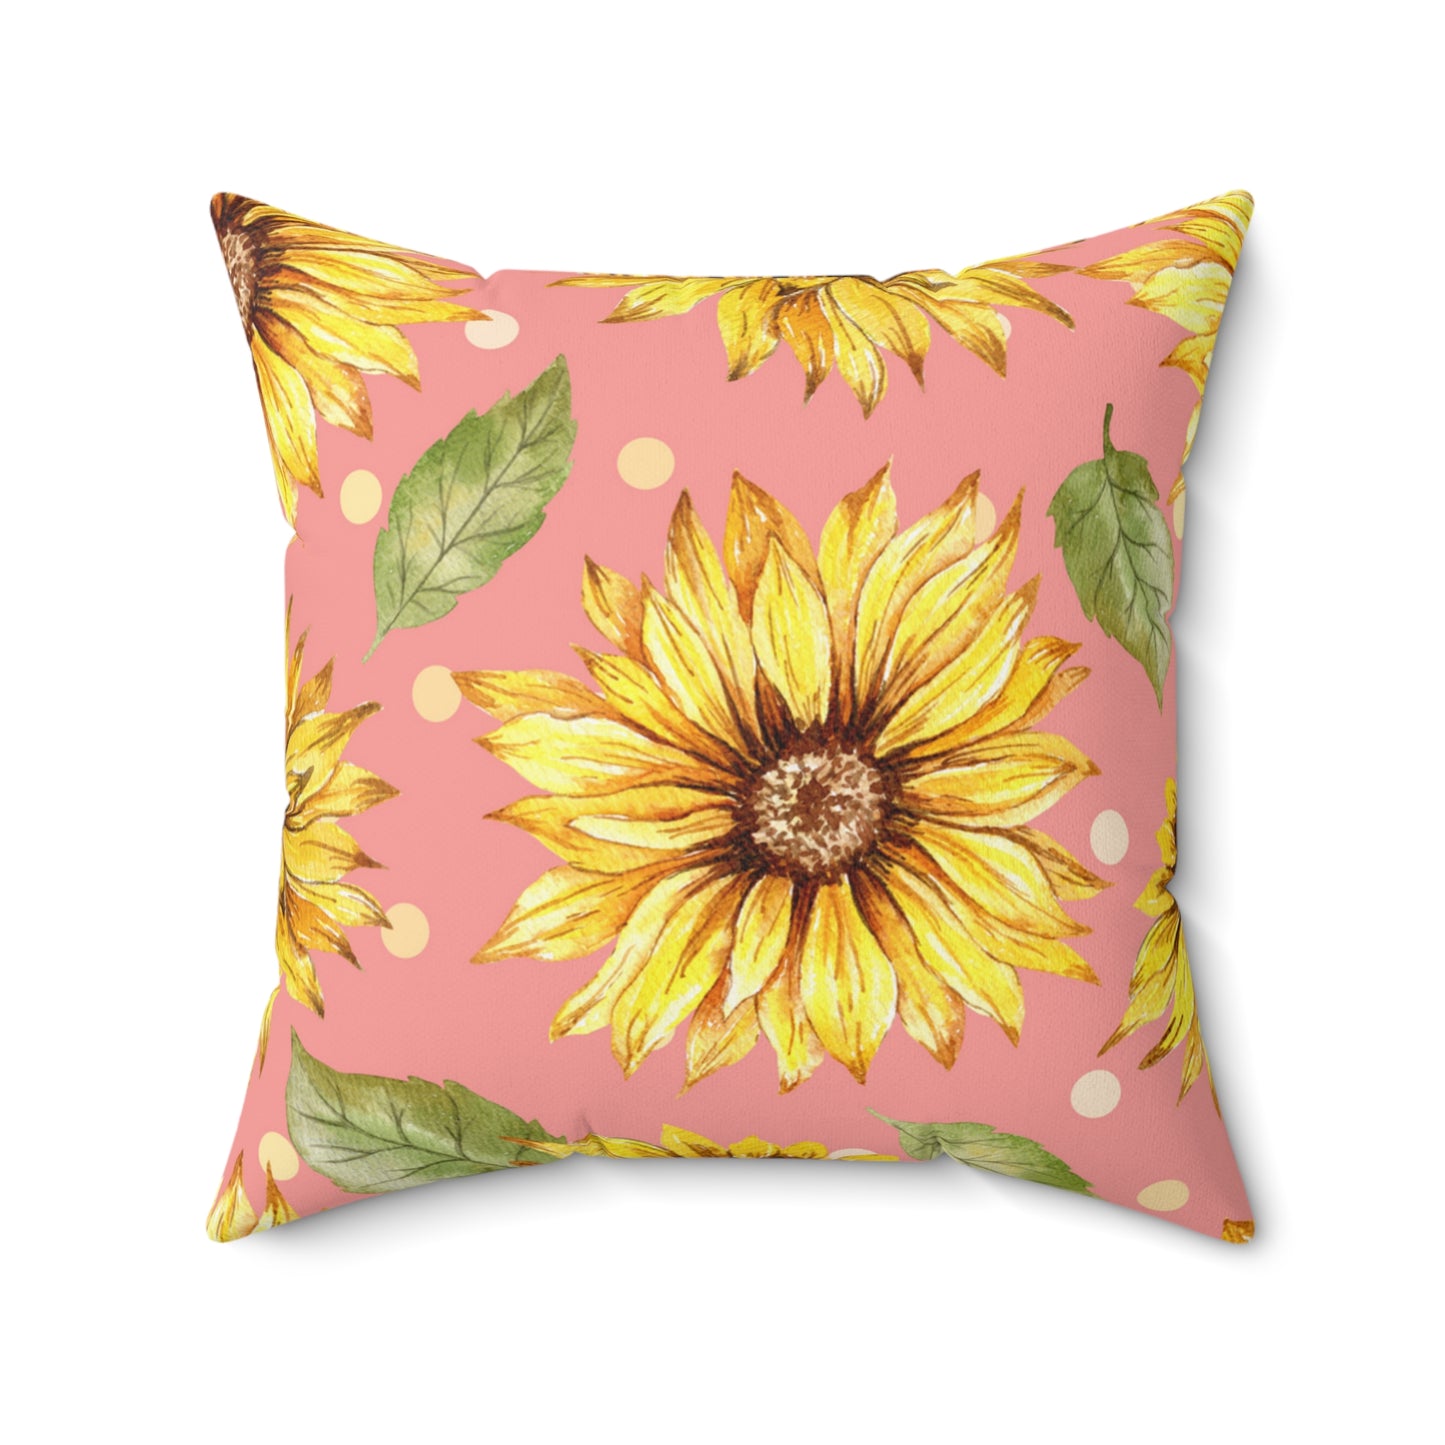 Pink & Sunflowers Square Pillow